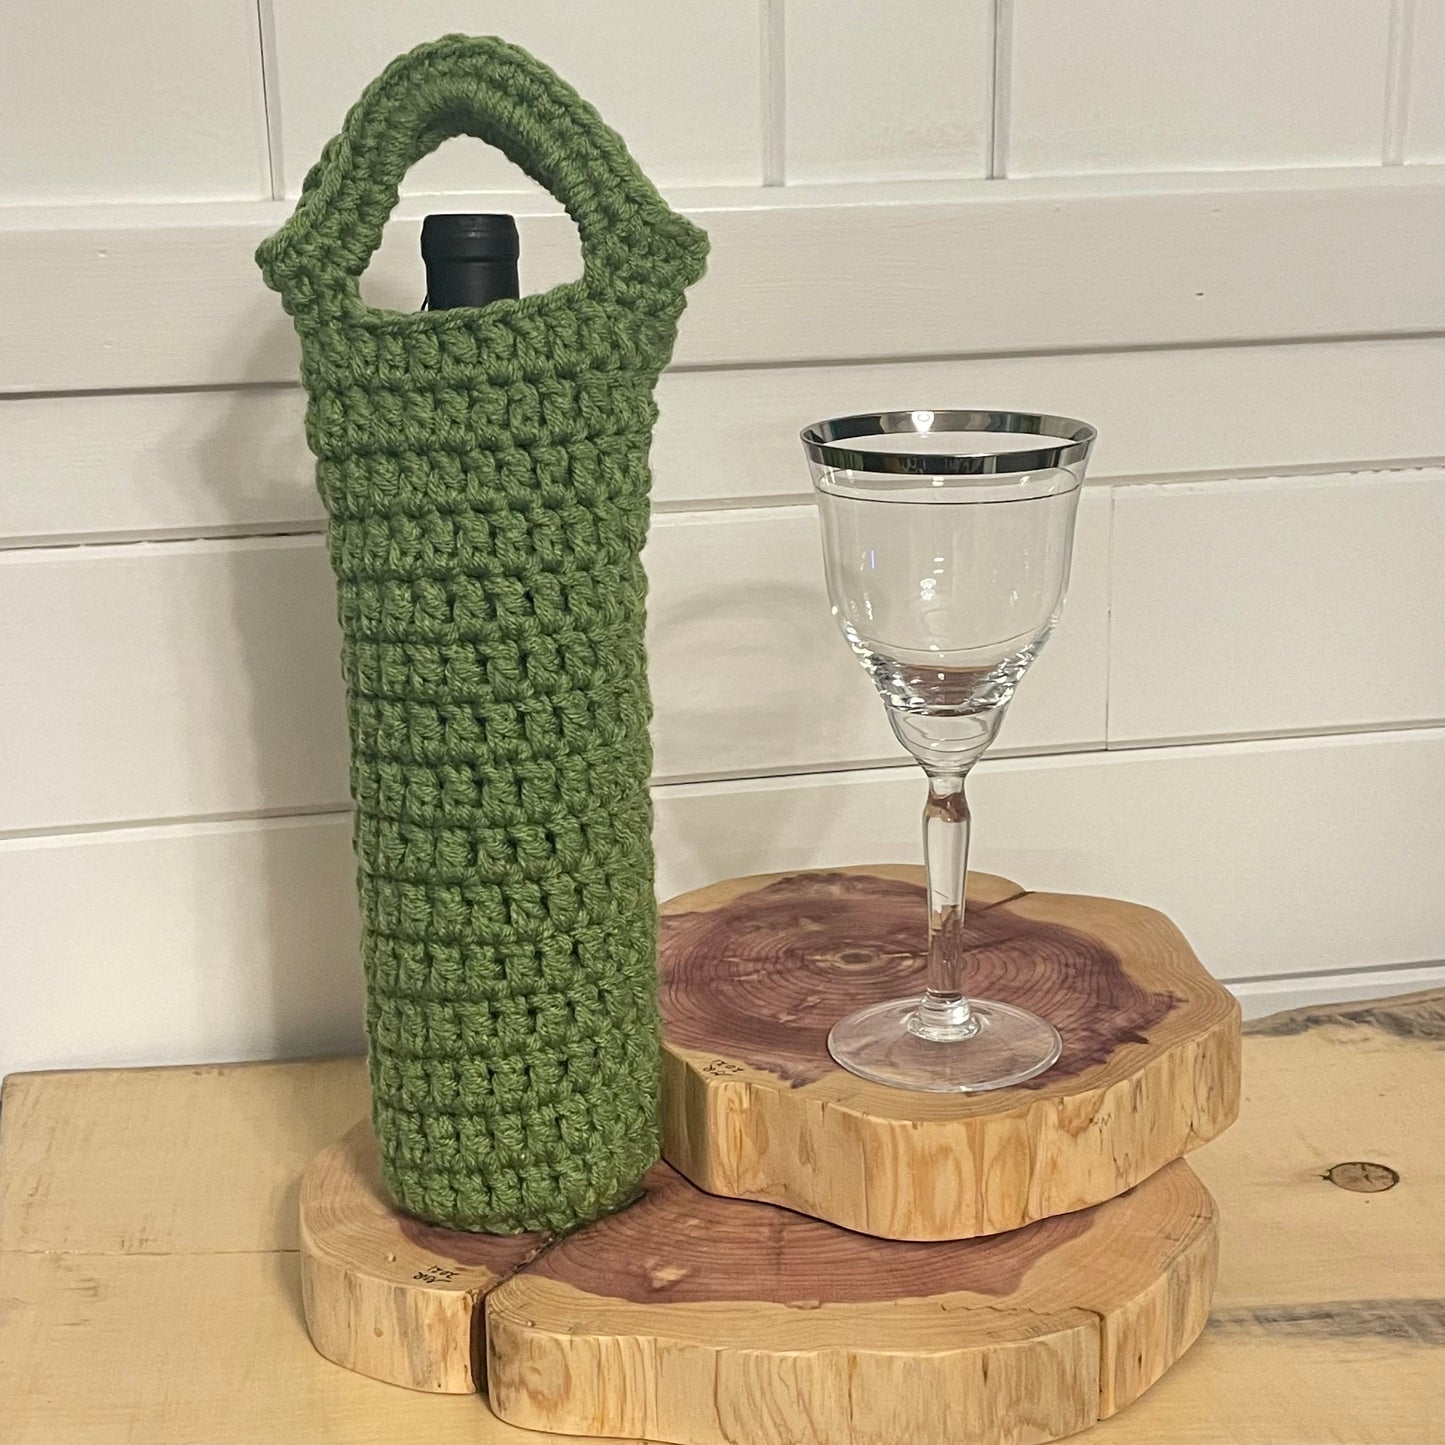 Poinsettia Wine Bottle Carrier Holders Hand Crocheted Holiday Gift Bag Knit Embellished Fall Winter Flower Floral Alcohol Avocado Green Red